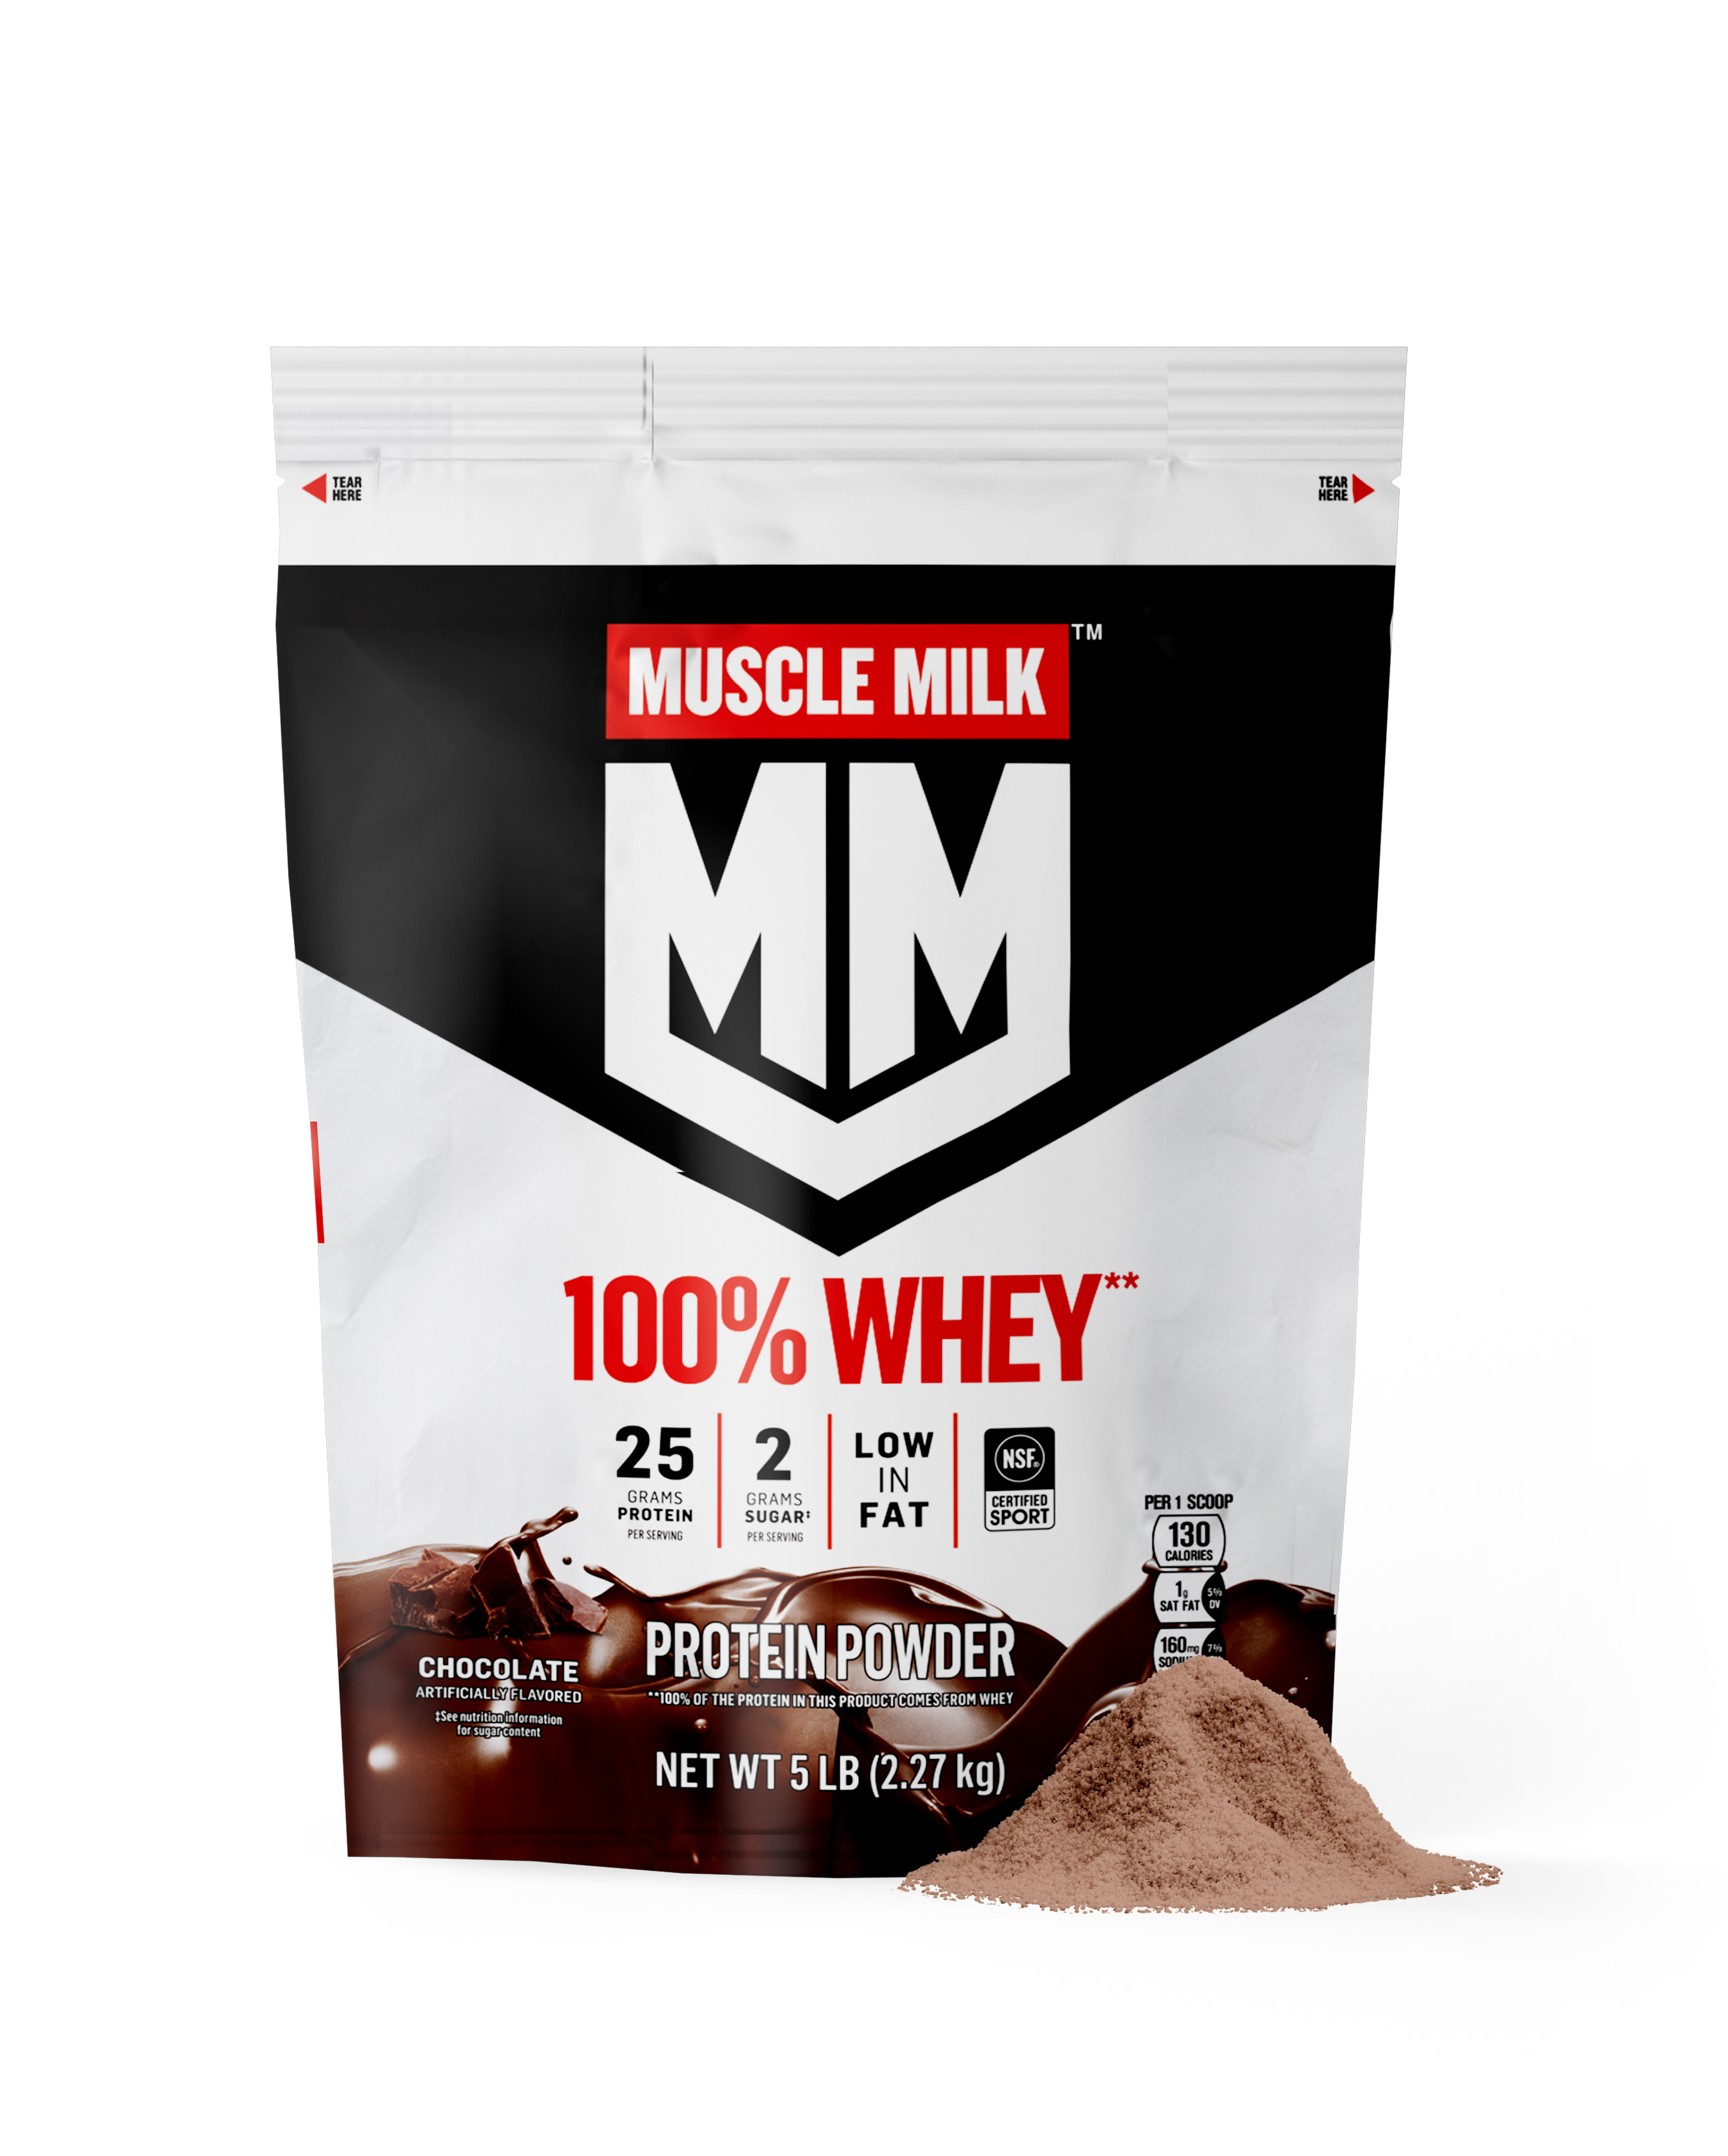 https://www.datocms-assets.com/101859/1691767425-00660726760703_gatorade_musclemilk_100-whey_protein_chocolate_producttile_2680x3344.png?auto=format&fit=max&w=3840